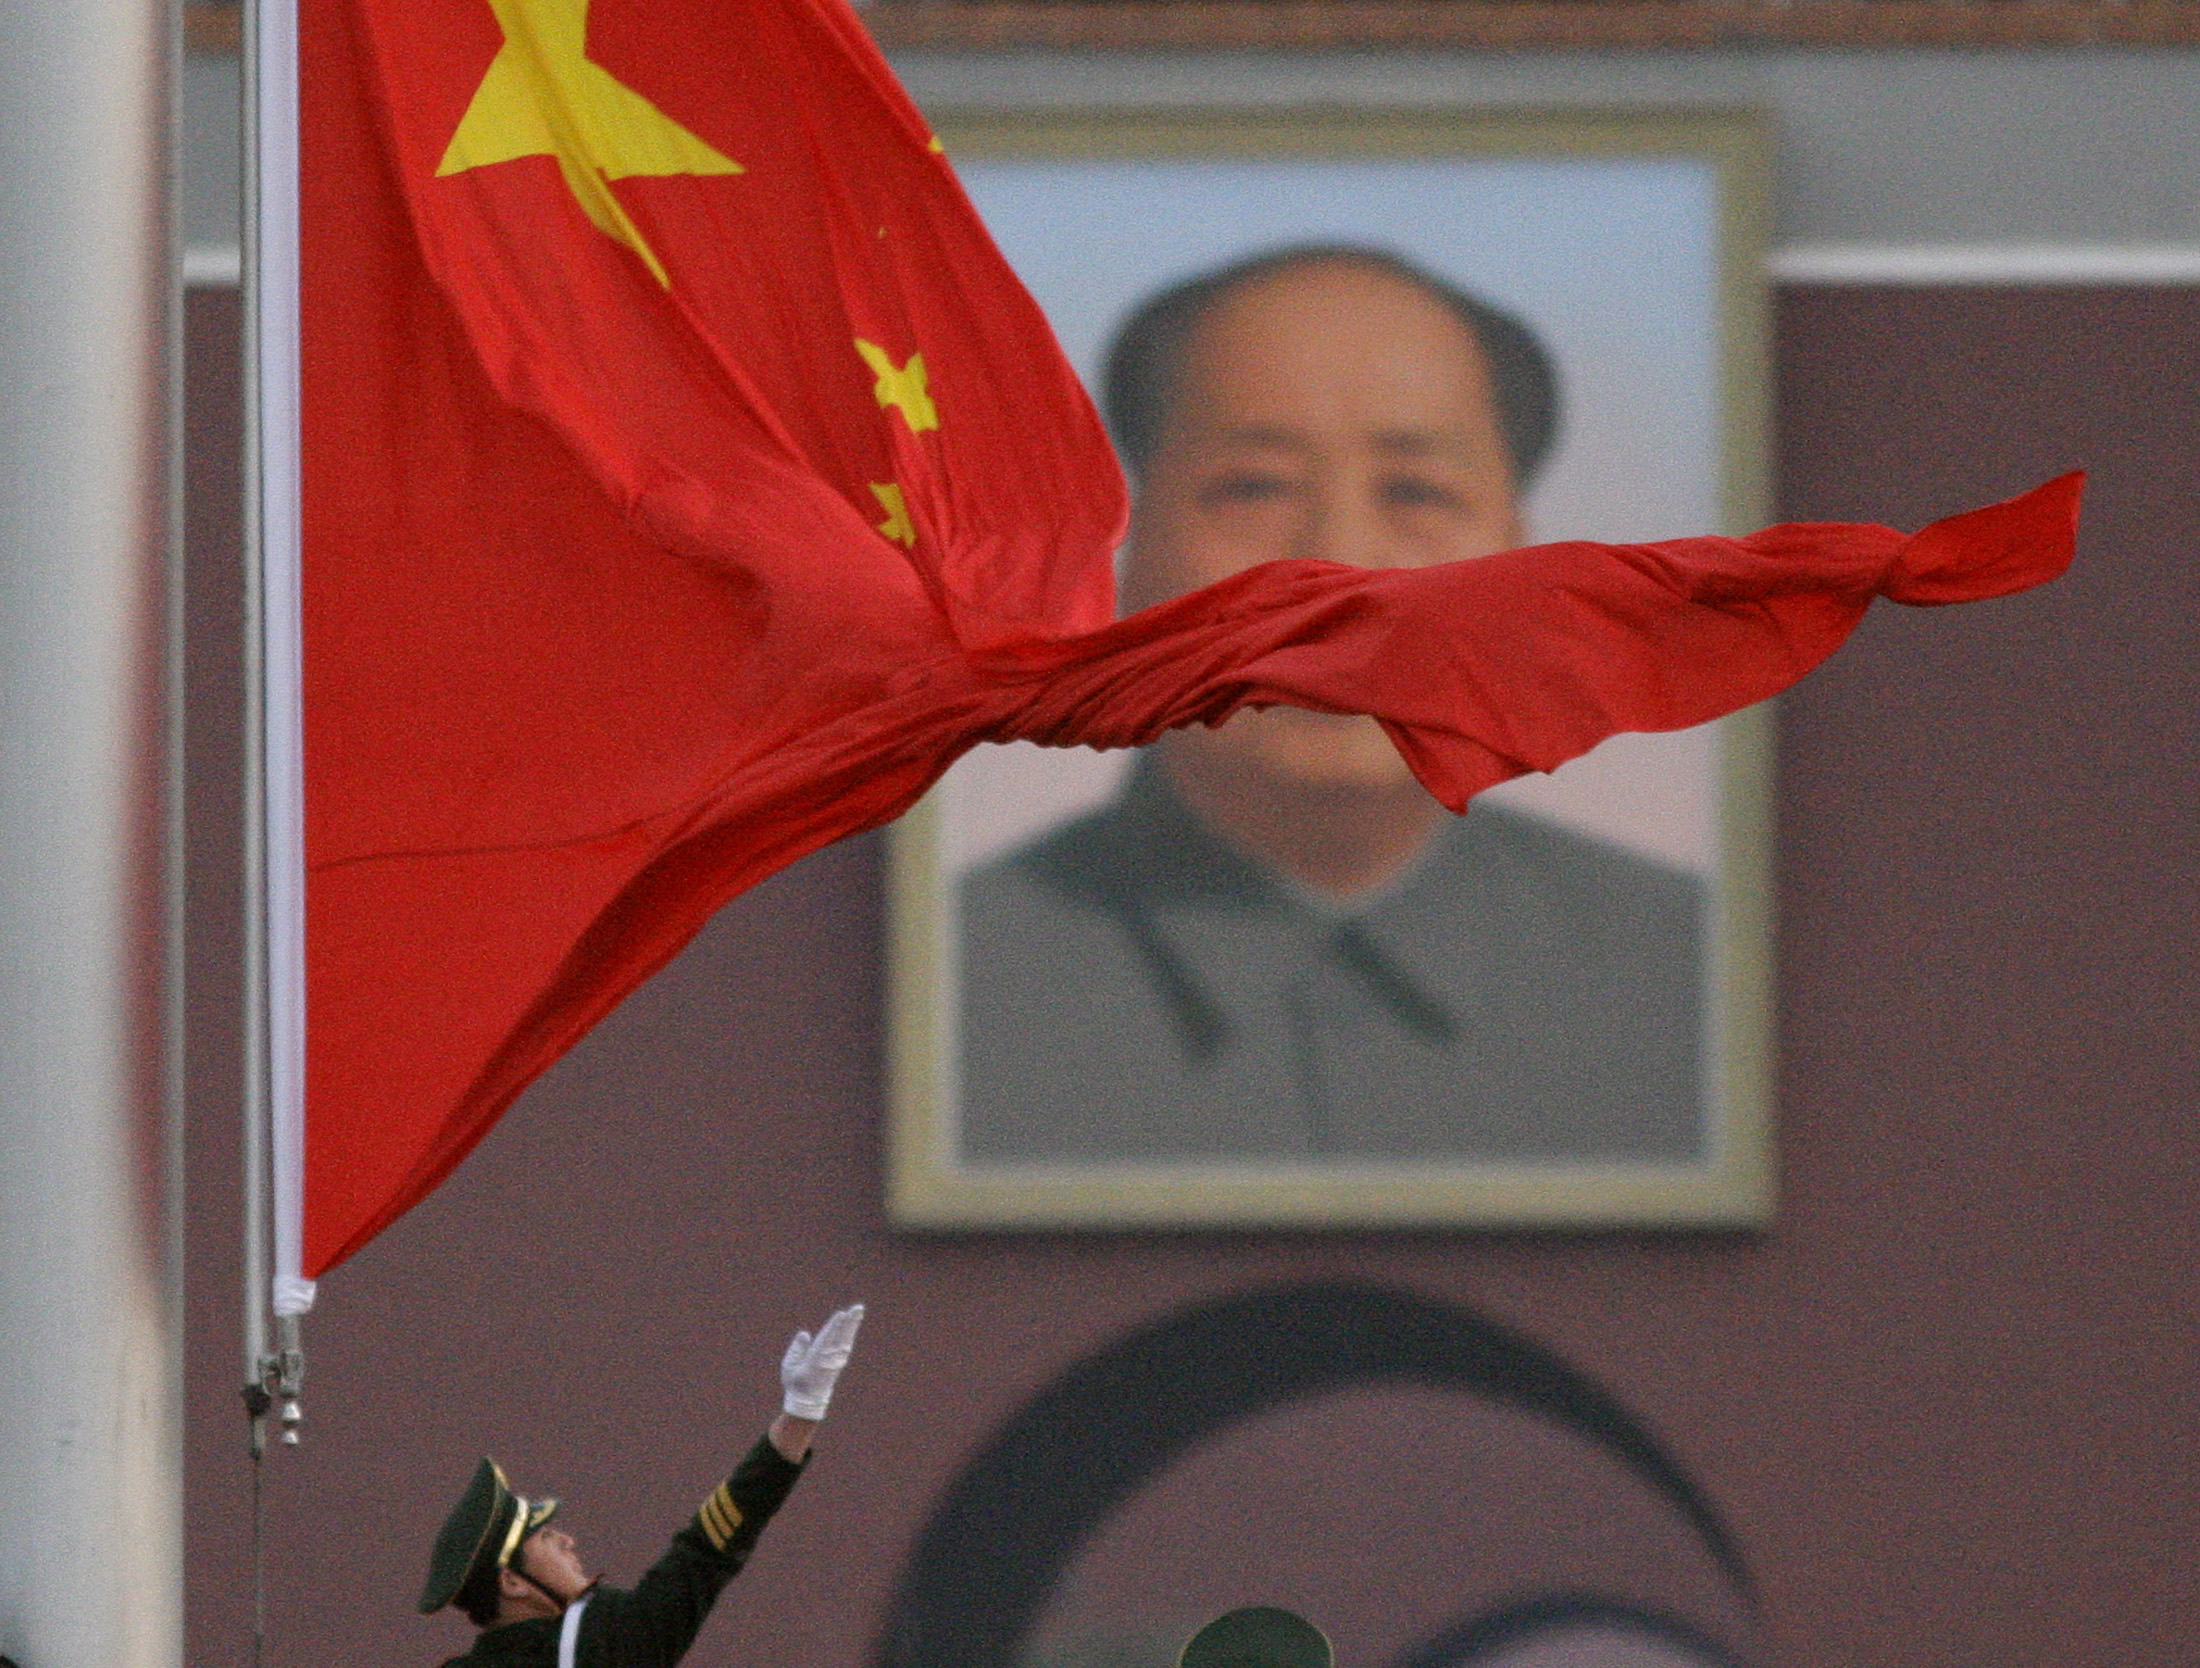 A paramilitary policeman throws the Chinese flag as he raises it in front of the portrait of Chairman Mao Zedong hanging in Beijing's Tiananmen Square March 5, 2008. REUTERS/David Gray     